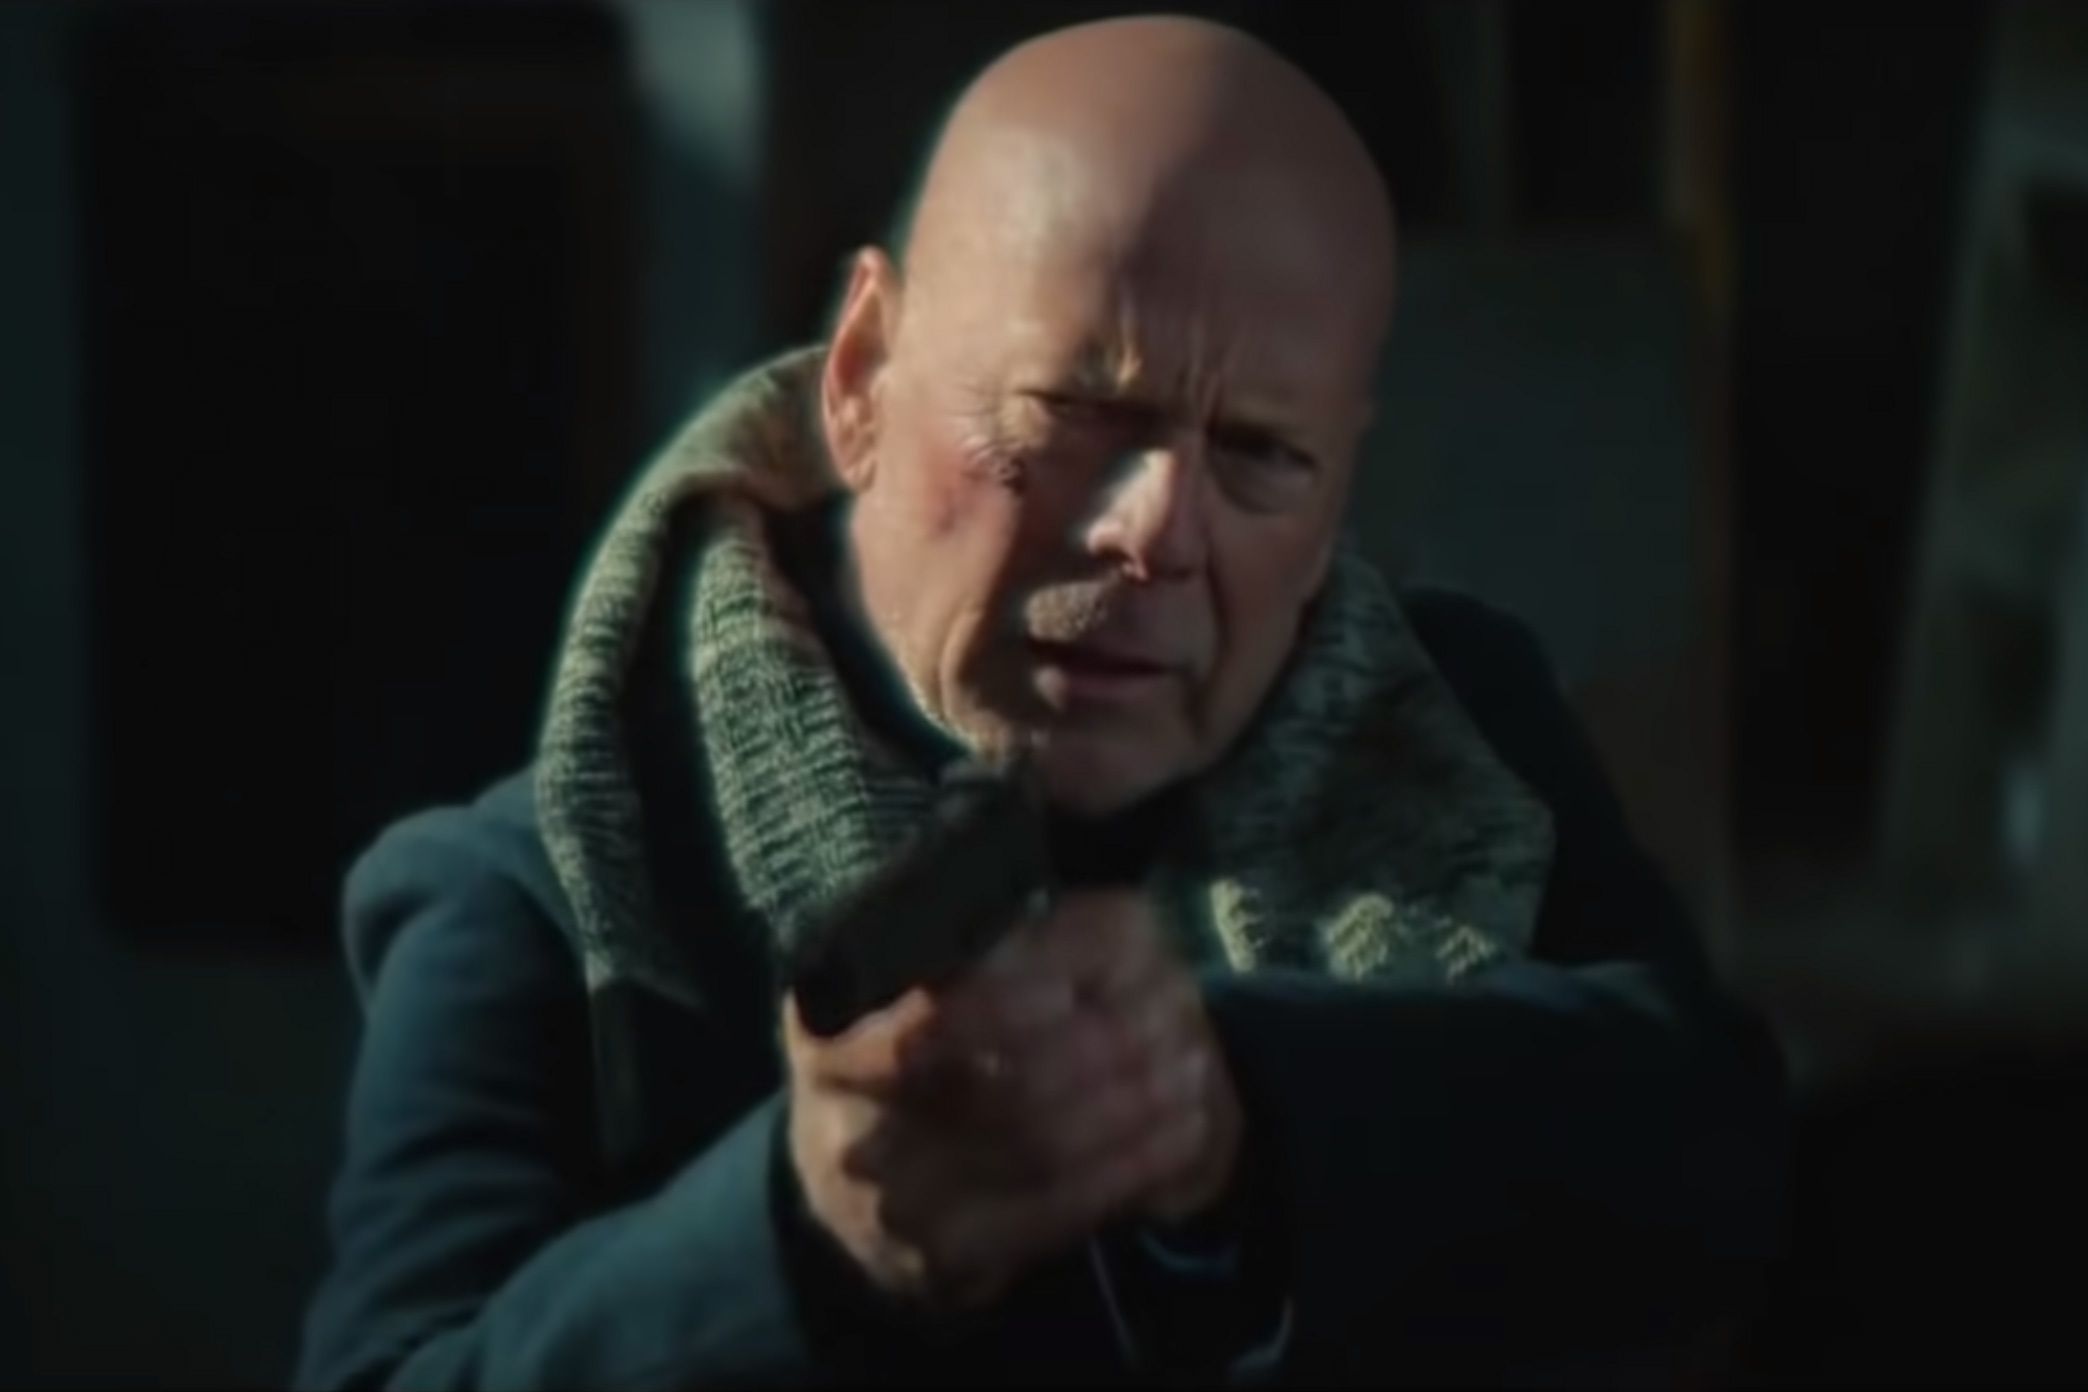 The 18 Best Straight To Video Bruce Willis Movies Ranked After a botched heist, eddie (bruce willis), a murderous crime boss, hunts down the seductive thief karen (claire forlani) who failed him. bruce willis movies ranked